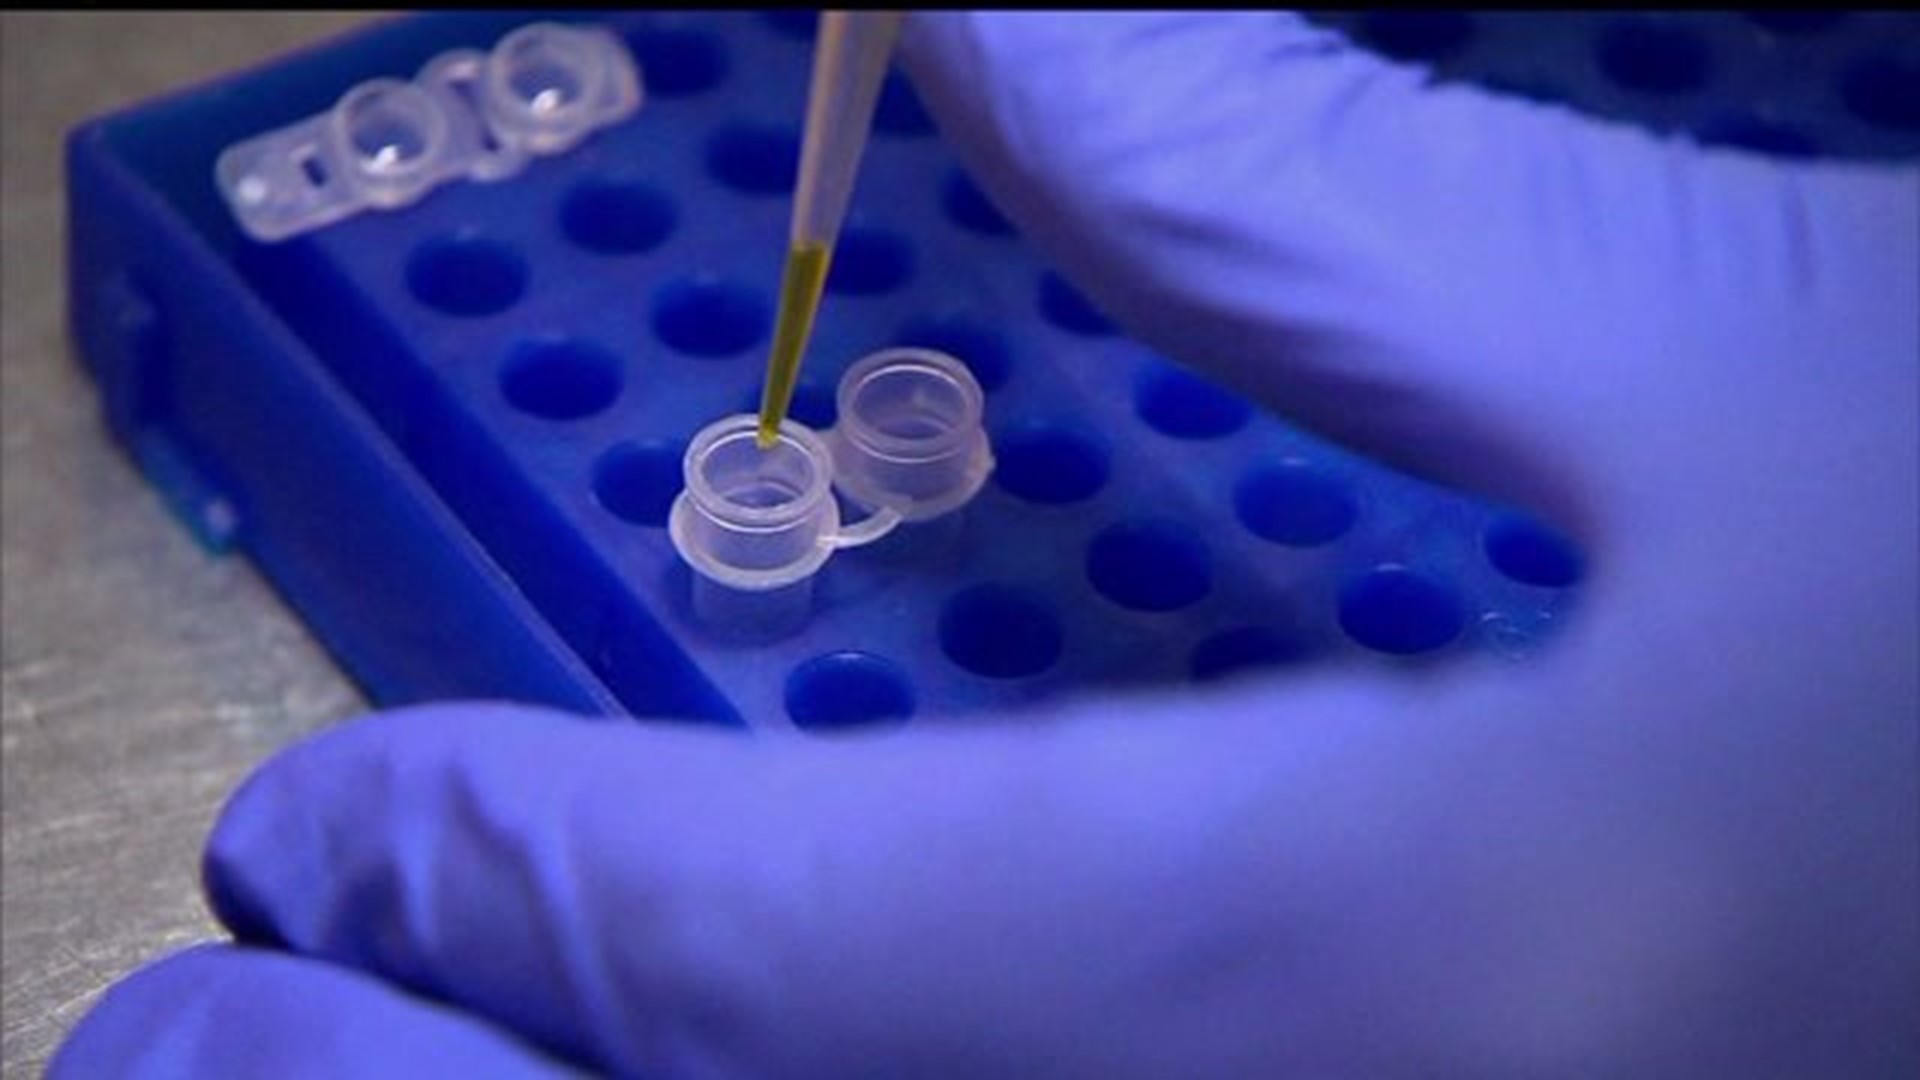 State lawmakers considering law to require DNA samples after arrest for serious crimes